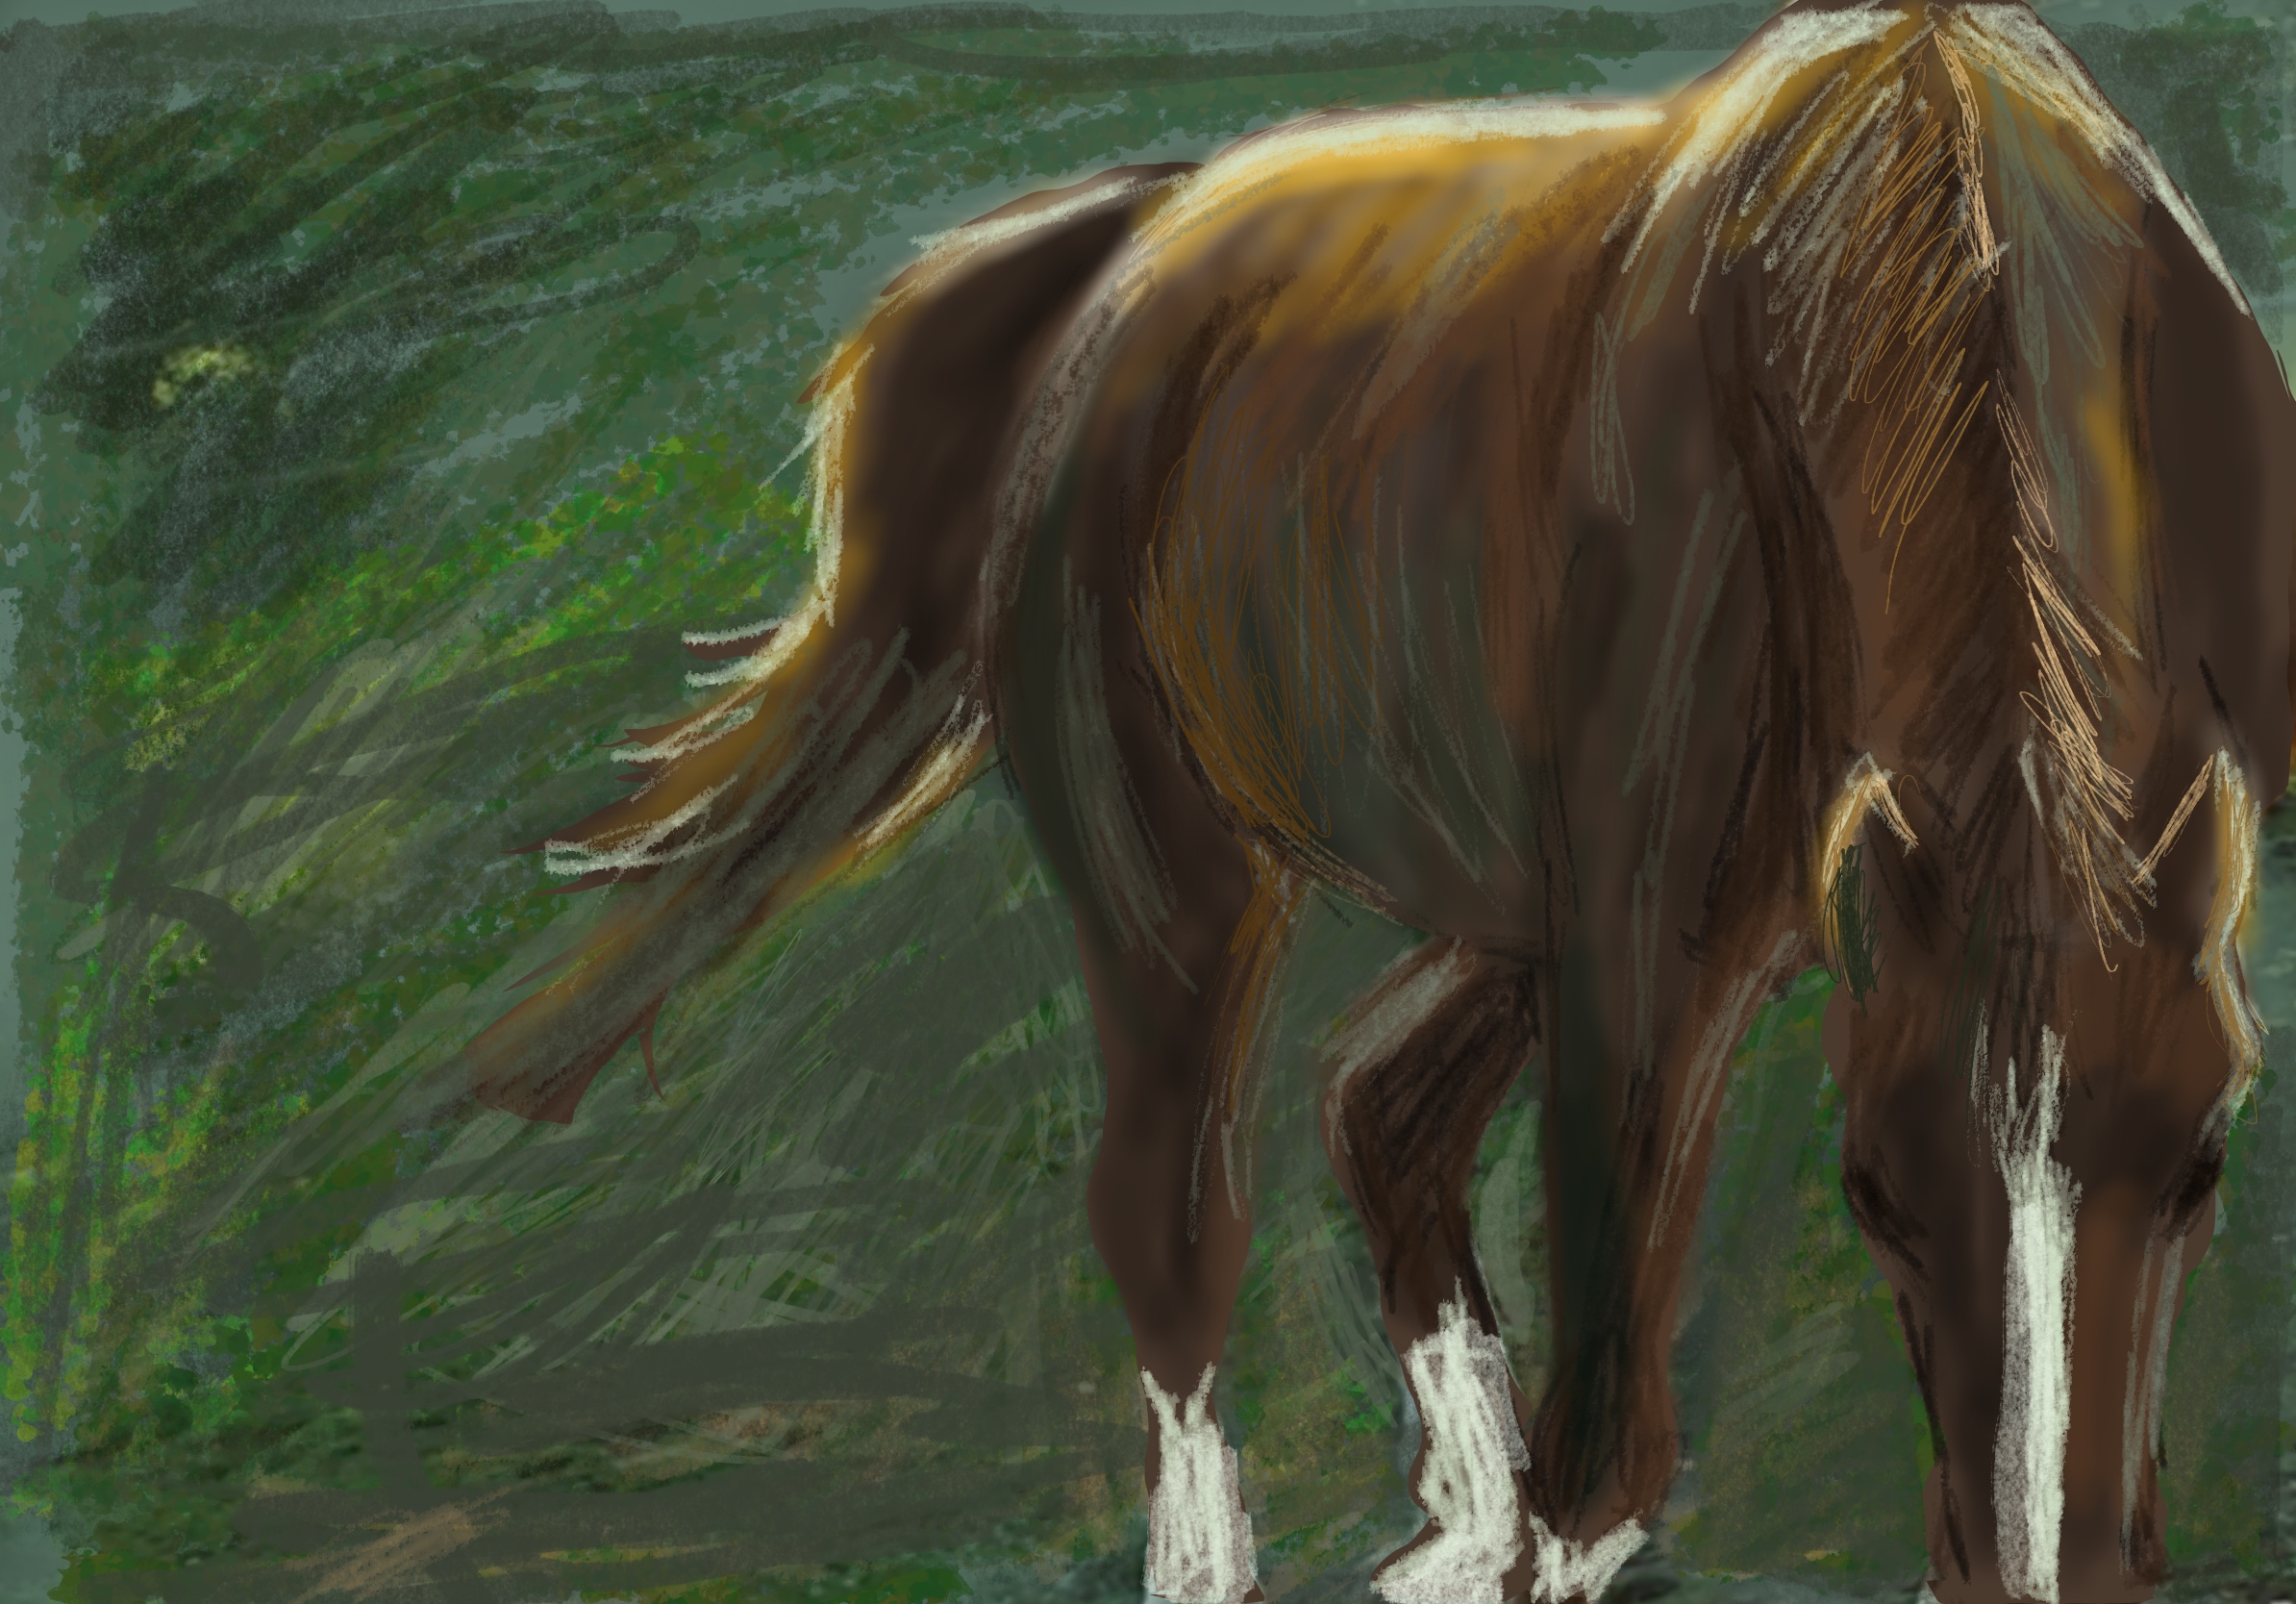 This is an iPad sketch of my horse Tiggy that I recently completed.